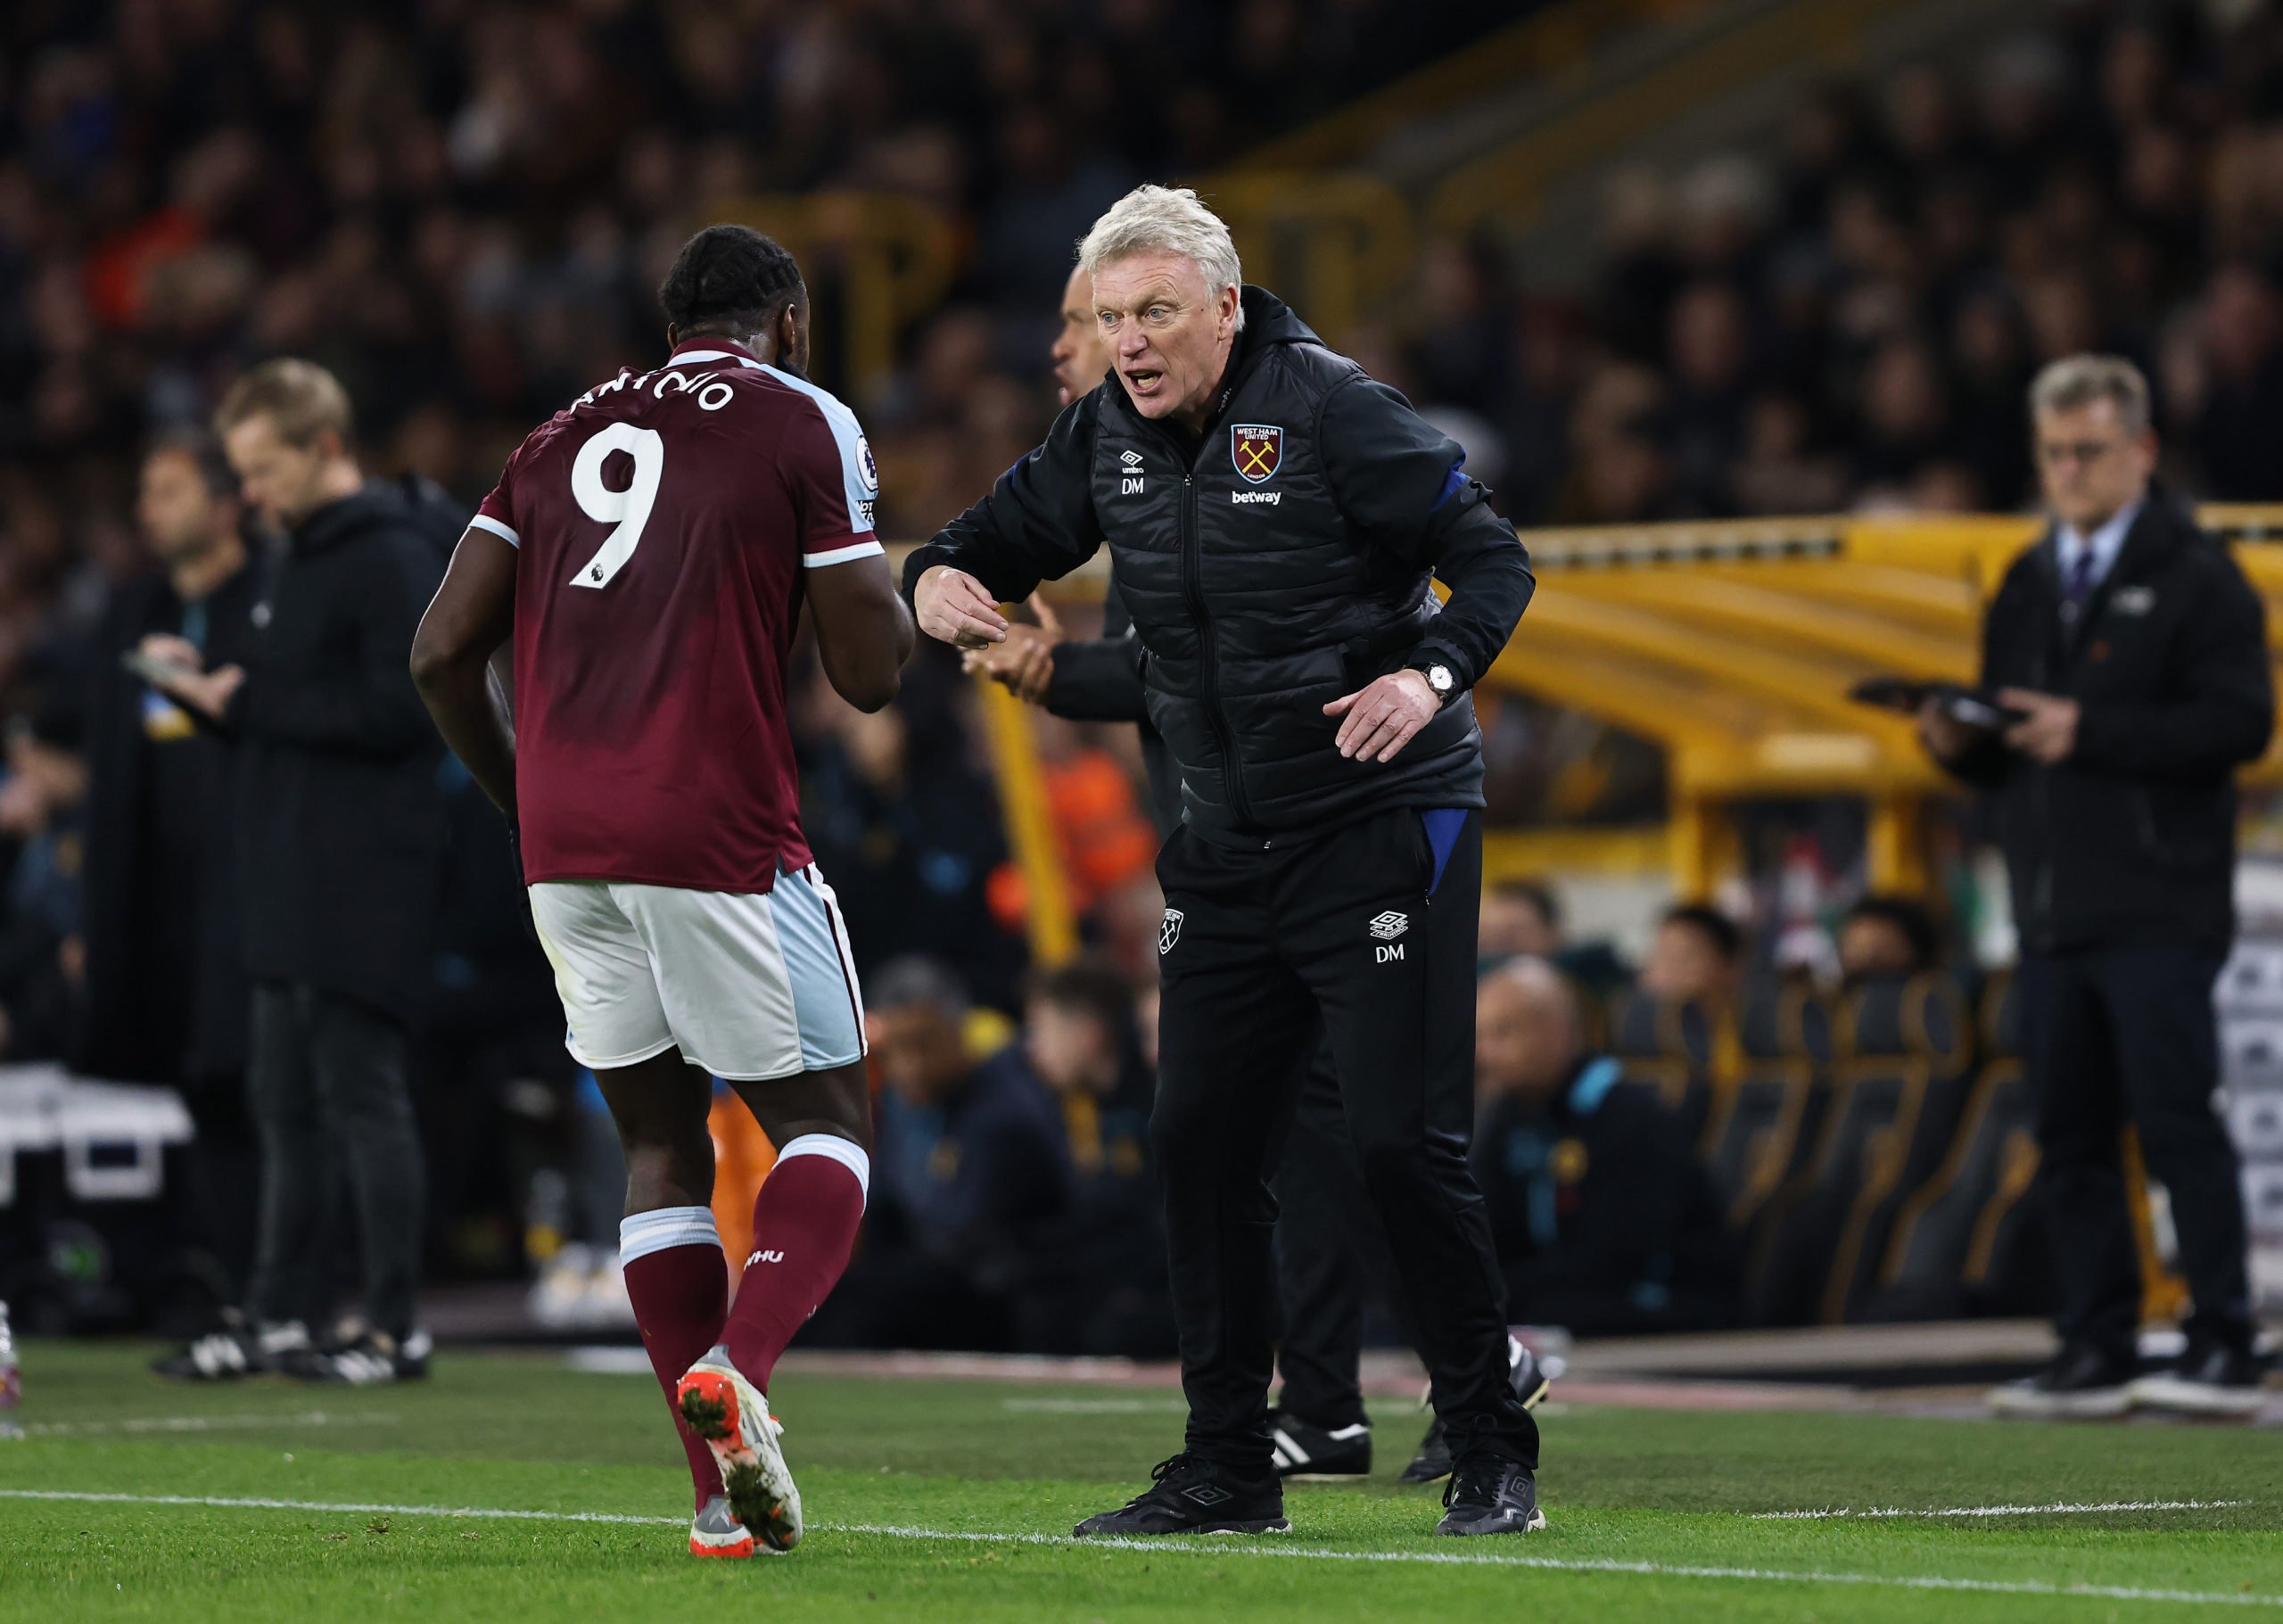 David Moyes should start West Ham's 26-year-old 'game-changer' in place of Michail Antonio to surprise Liverpool